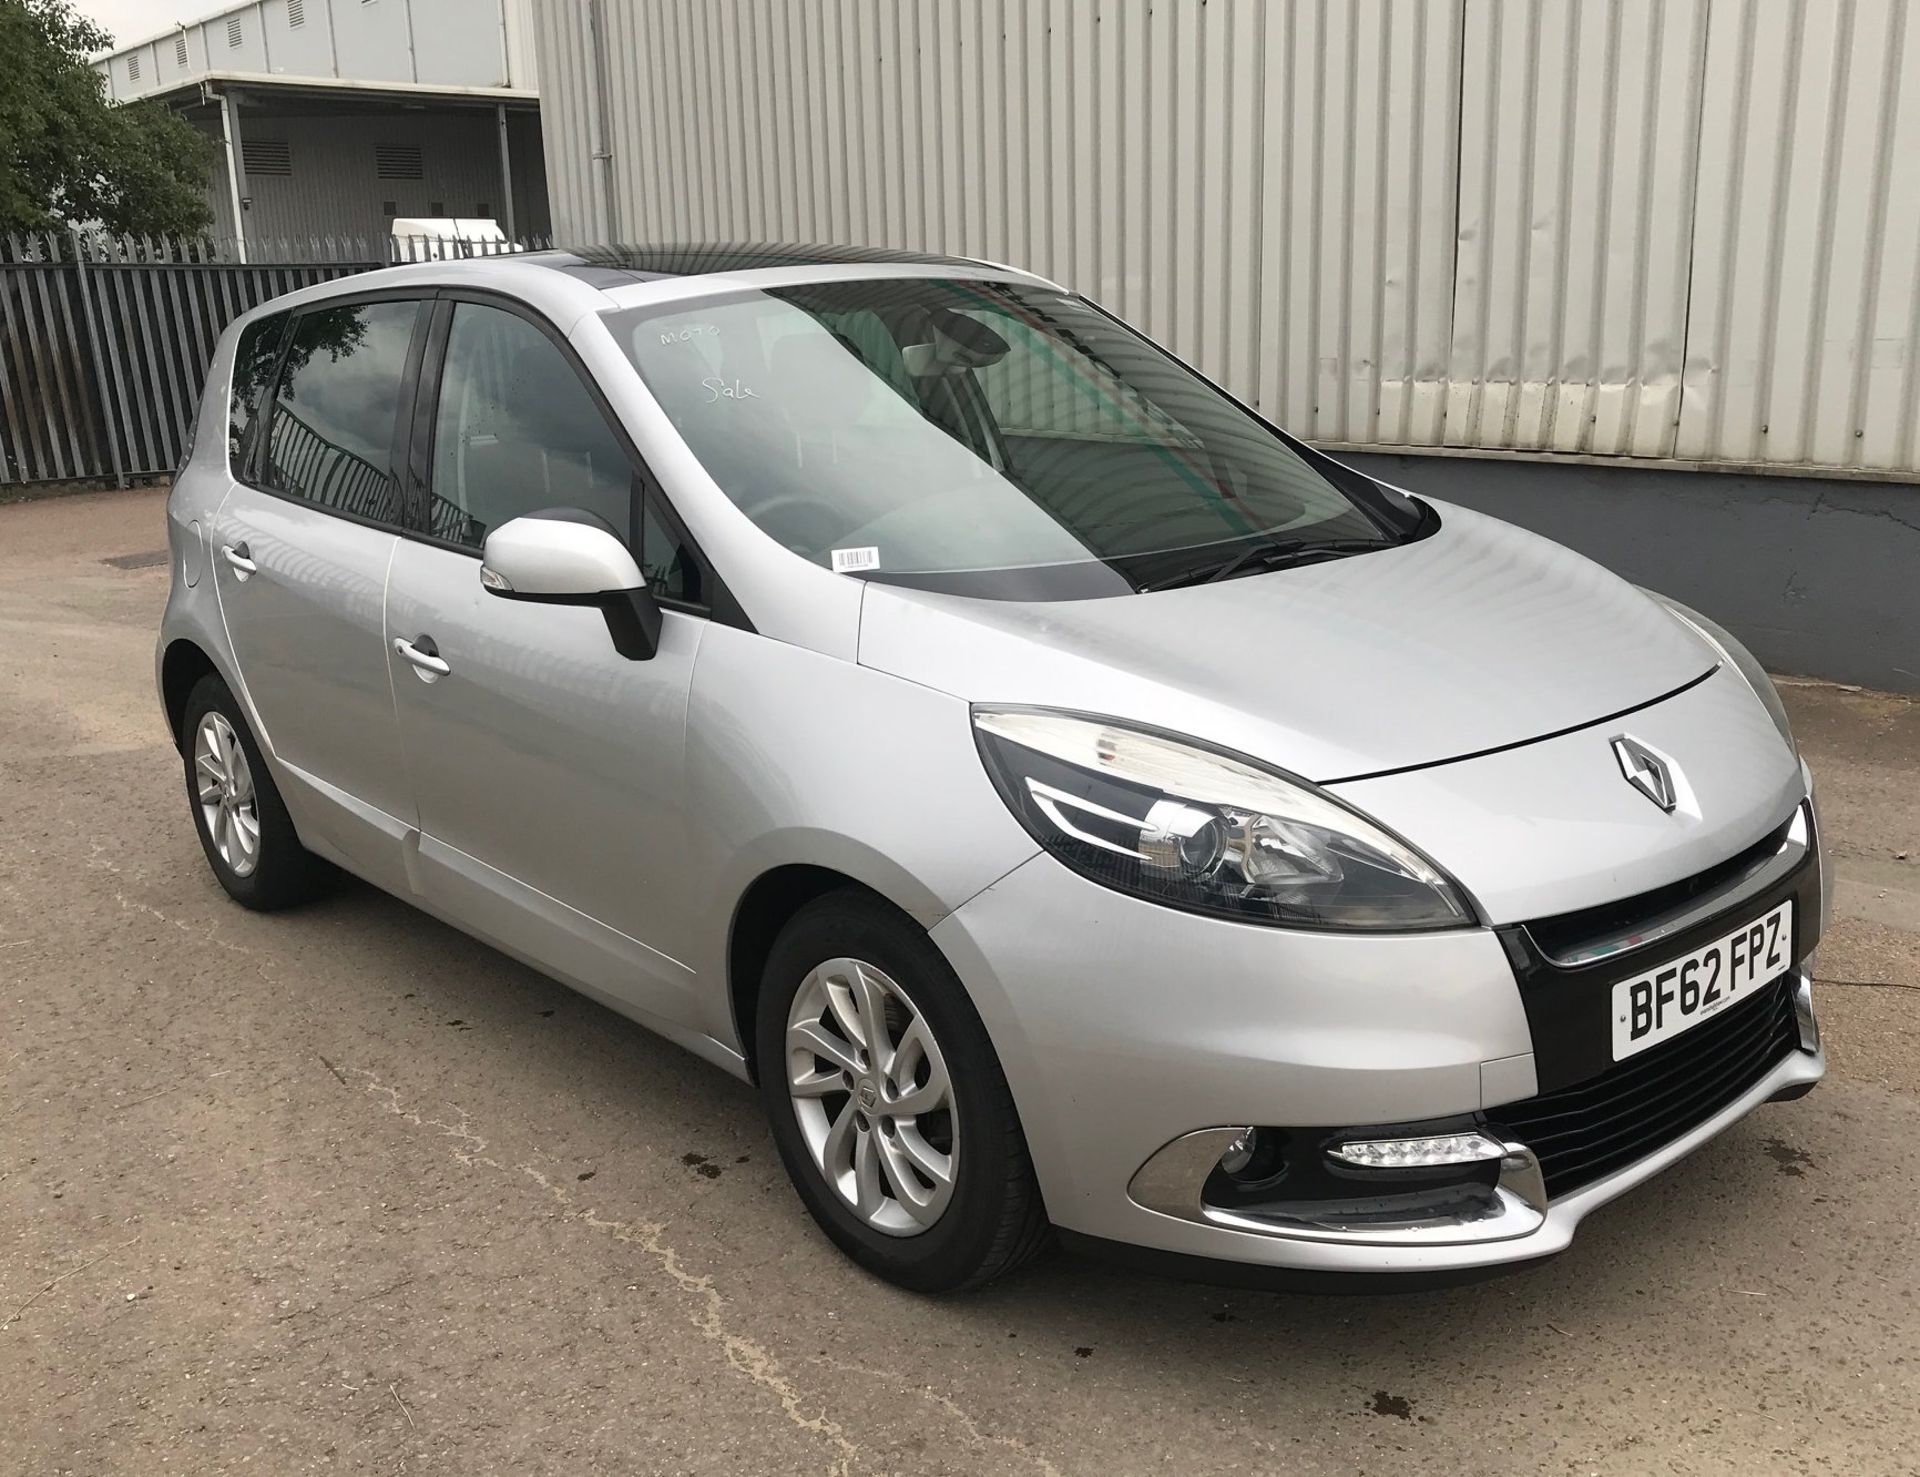 2012 Renault Scenic 1.5 Dci D-Que Tt Energy 5 Dr MPV - CL505 - NO VAT ON THE HAMMER - Location: Corb